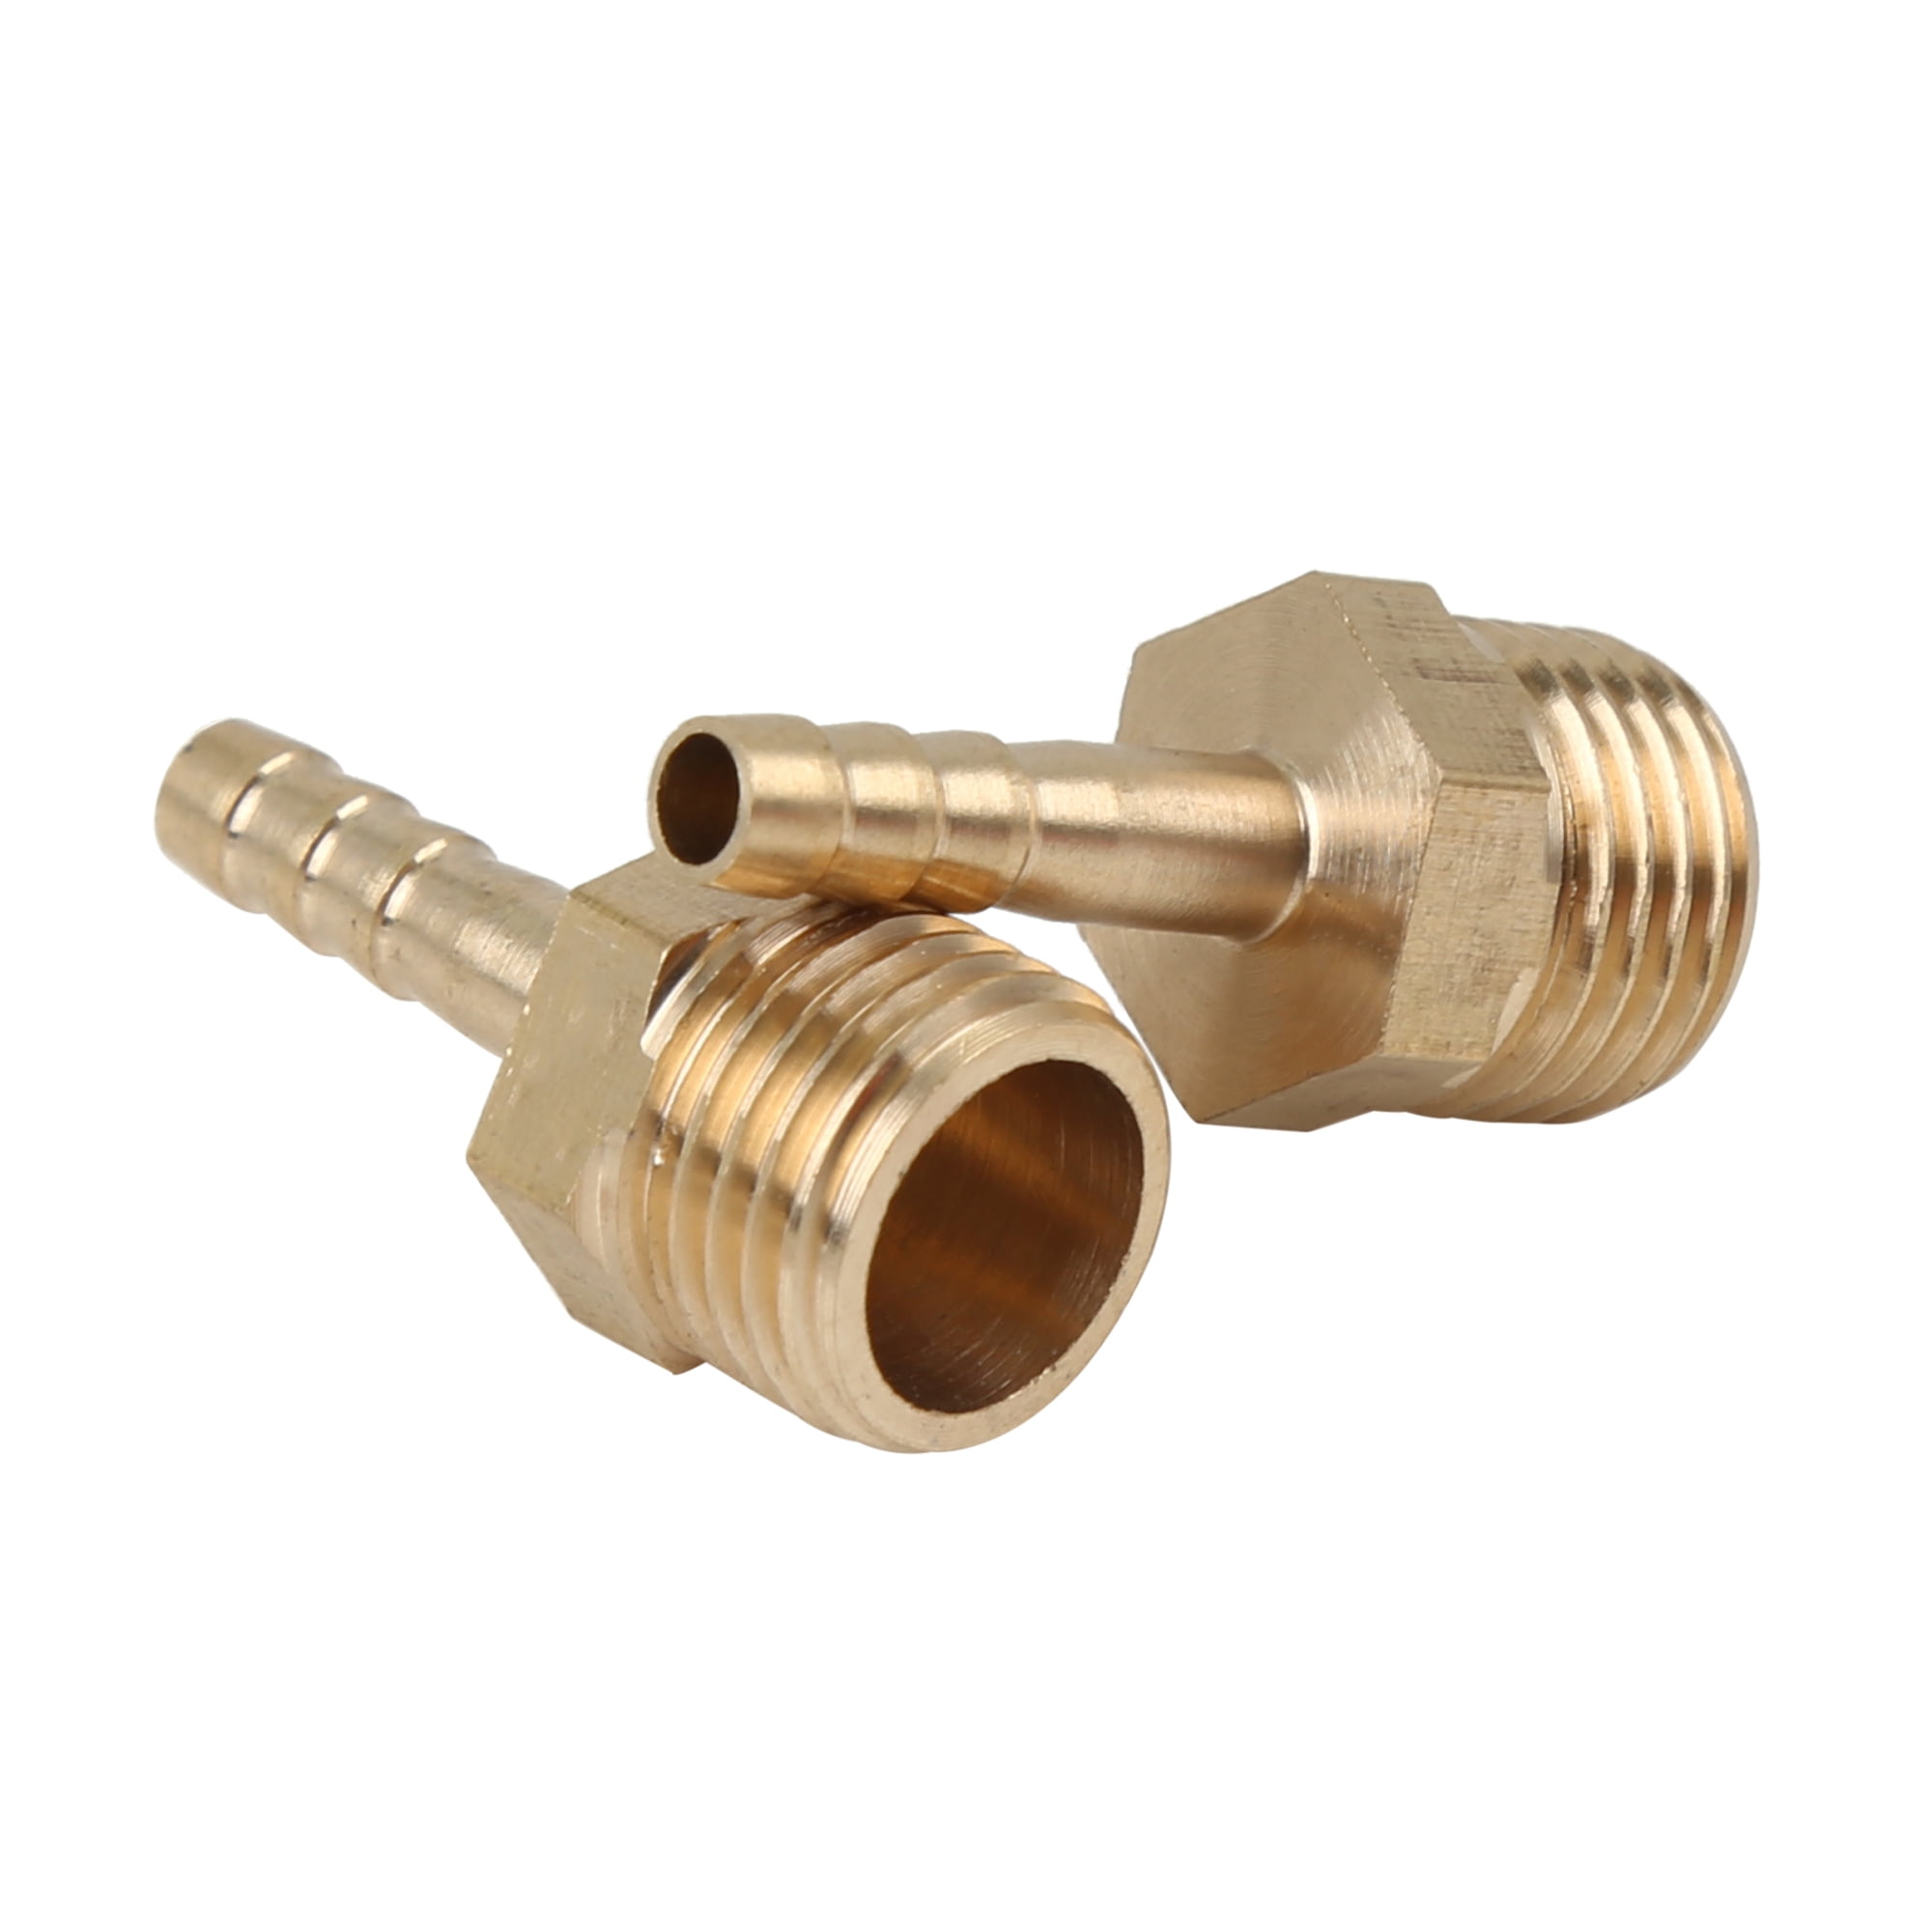 4mm Hose ID x 1/4 NPT Male Pipe Car Brass Hose Tail Barb Fitting Connector  for Joiner Air Water Fuel Pipe - 5pcs 